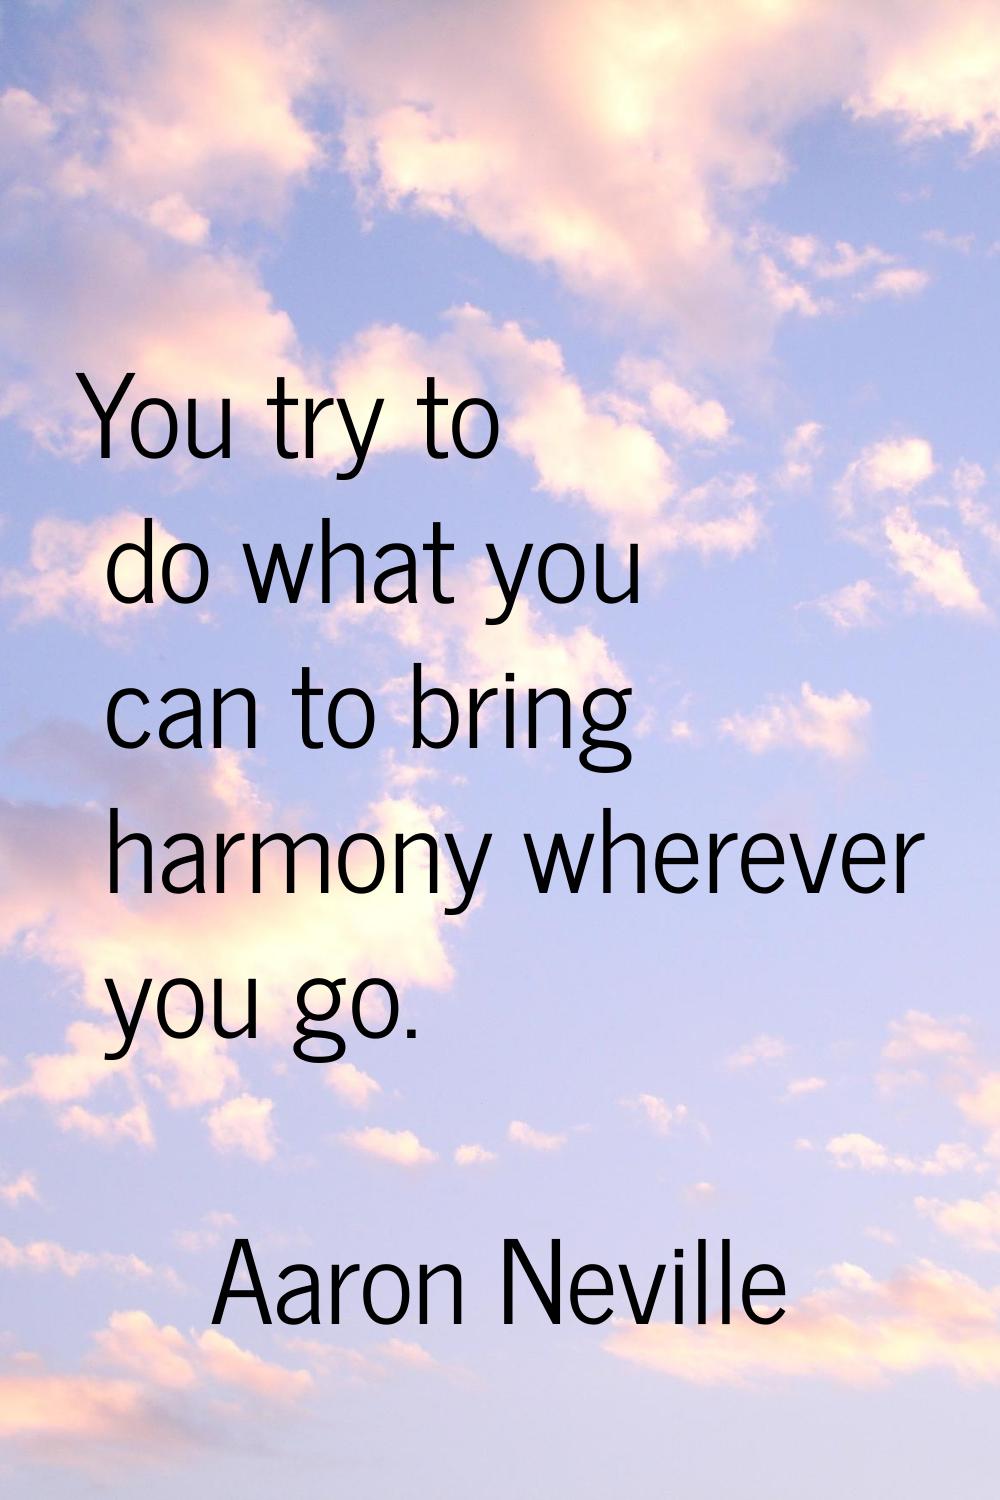 You try to do what you can to bring harmony wherever you go.